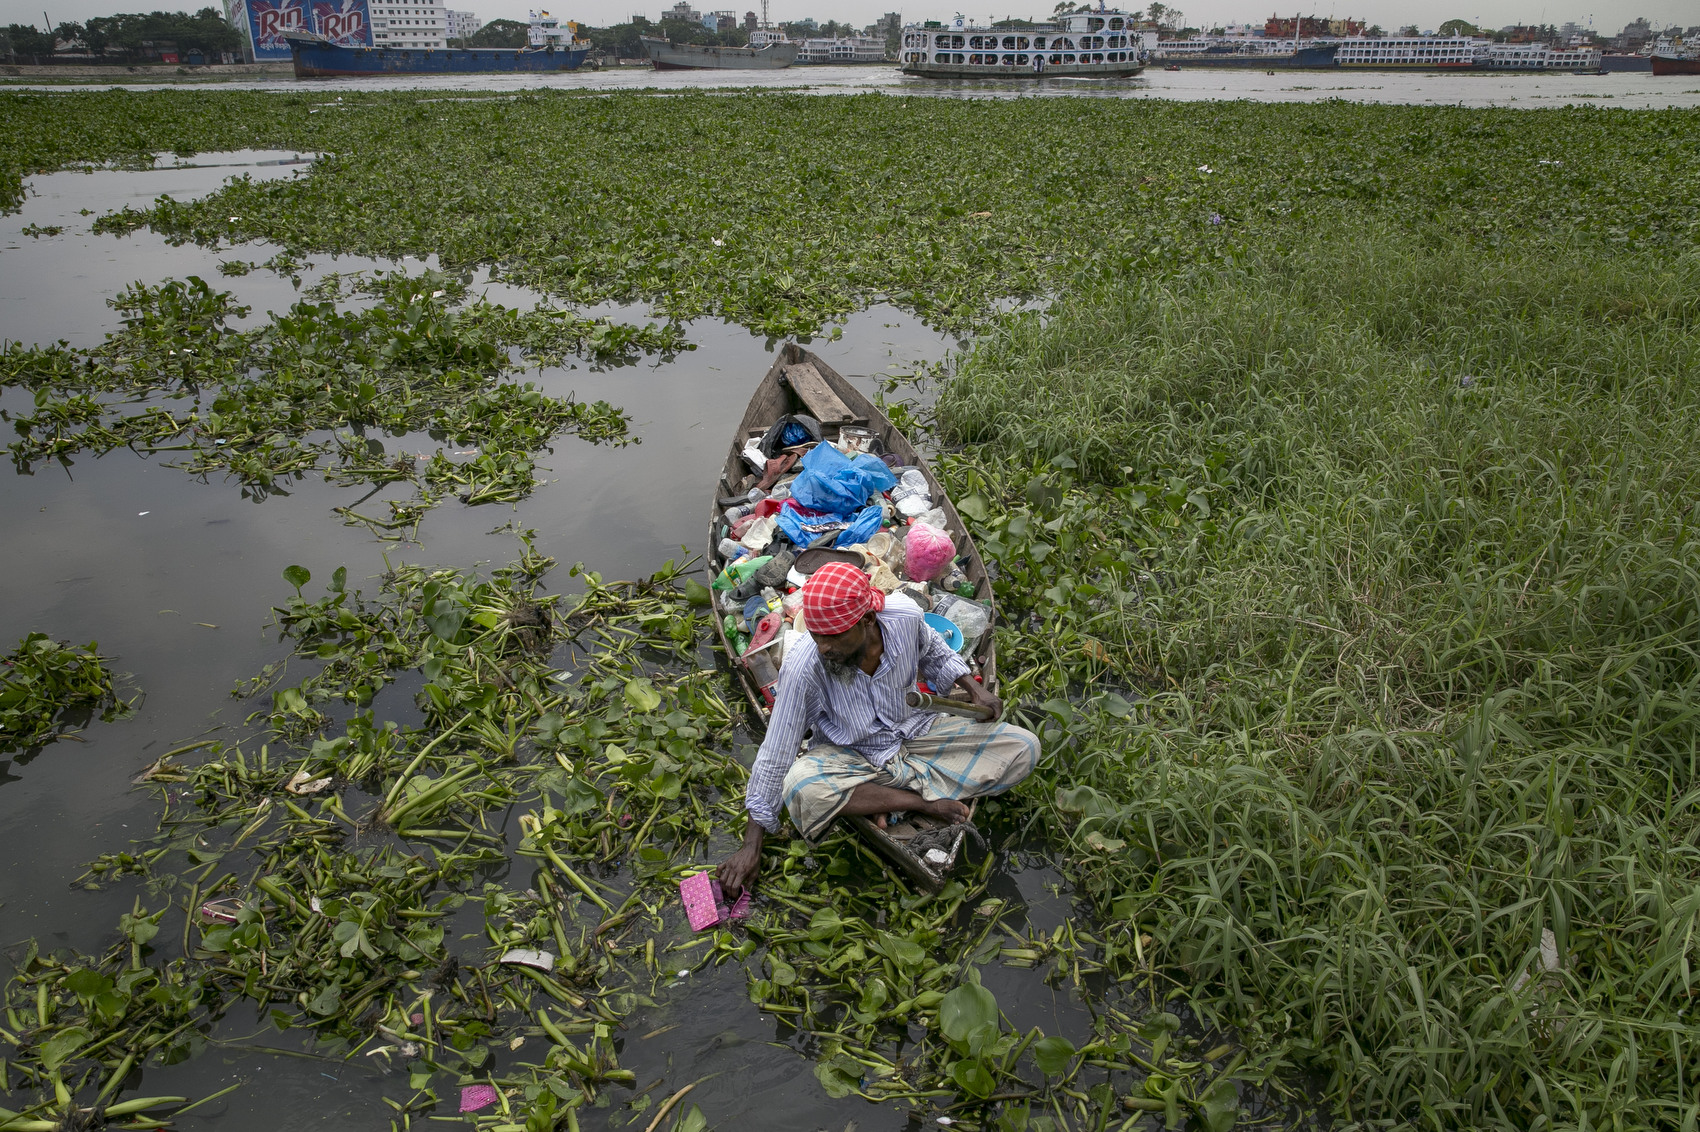 Firoz Milon collects waste on the Buriganga river in Dhaka, Bangladesh. He sells one kilo of waste for 20 taka and says he averages 400-600 taka per day of work. Bangladesh has been reportedly ranked 10th out of the top 20 plastic polluter in the world with the Buriganga river known as one of the most polluted rivers in the country due to rampant dumping of industrial and human waste. Like many developing countries, Bangladesh lacks the infrastructure to effectively manage their waste which causes problems in keeping the waters safe for human and aquatic lives while dozens of tanneries on the banks of the river contribute industrial waste into the ground water. As June 5 was marked by the United Nations as World Environment Day, Buriganga symbolizes the general state of many rivers in Bangladesh, with the growing levels of pollutants and plastic waste consuming up all oxygen in the river and affecting our seafood while fishes consume bits of plastic which mimics their natural food sources and eventually lands on our dinner table. 